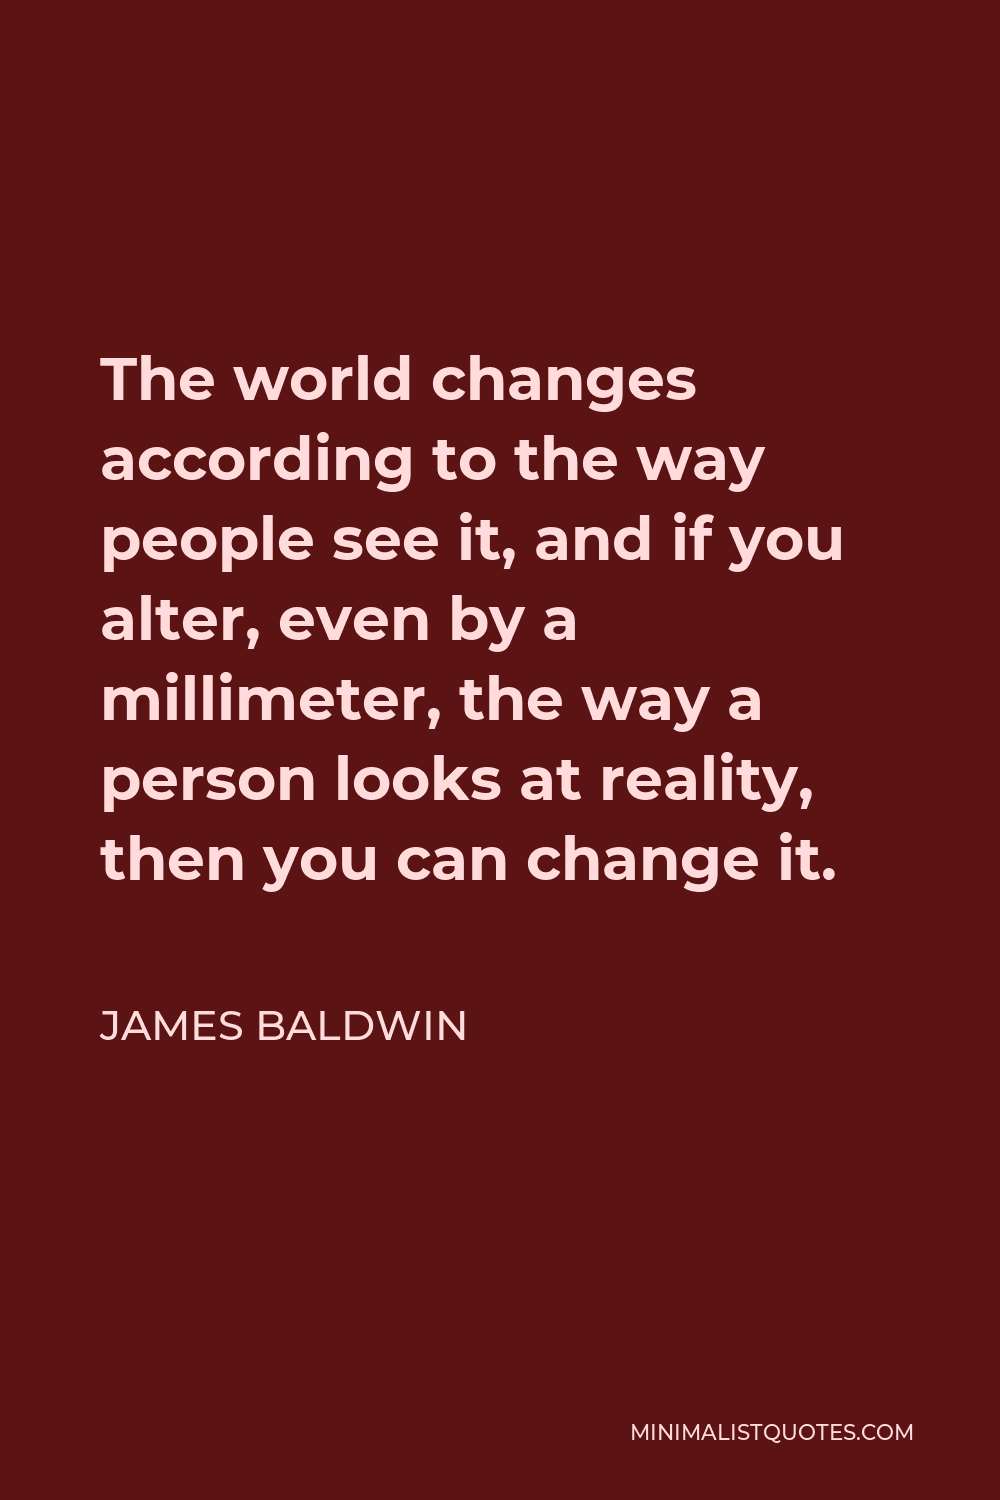 James Baldwin Quote - The world changes according to the way people see it, and if you alter, even by a millimeter, the way a person looks at reality, then you can change it.